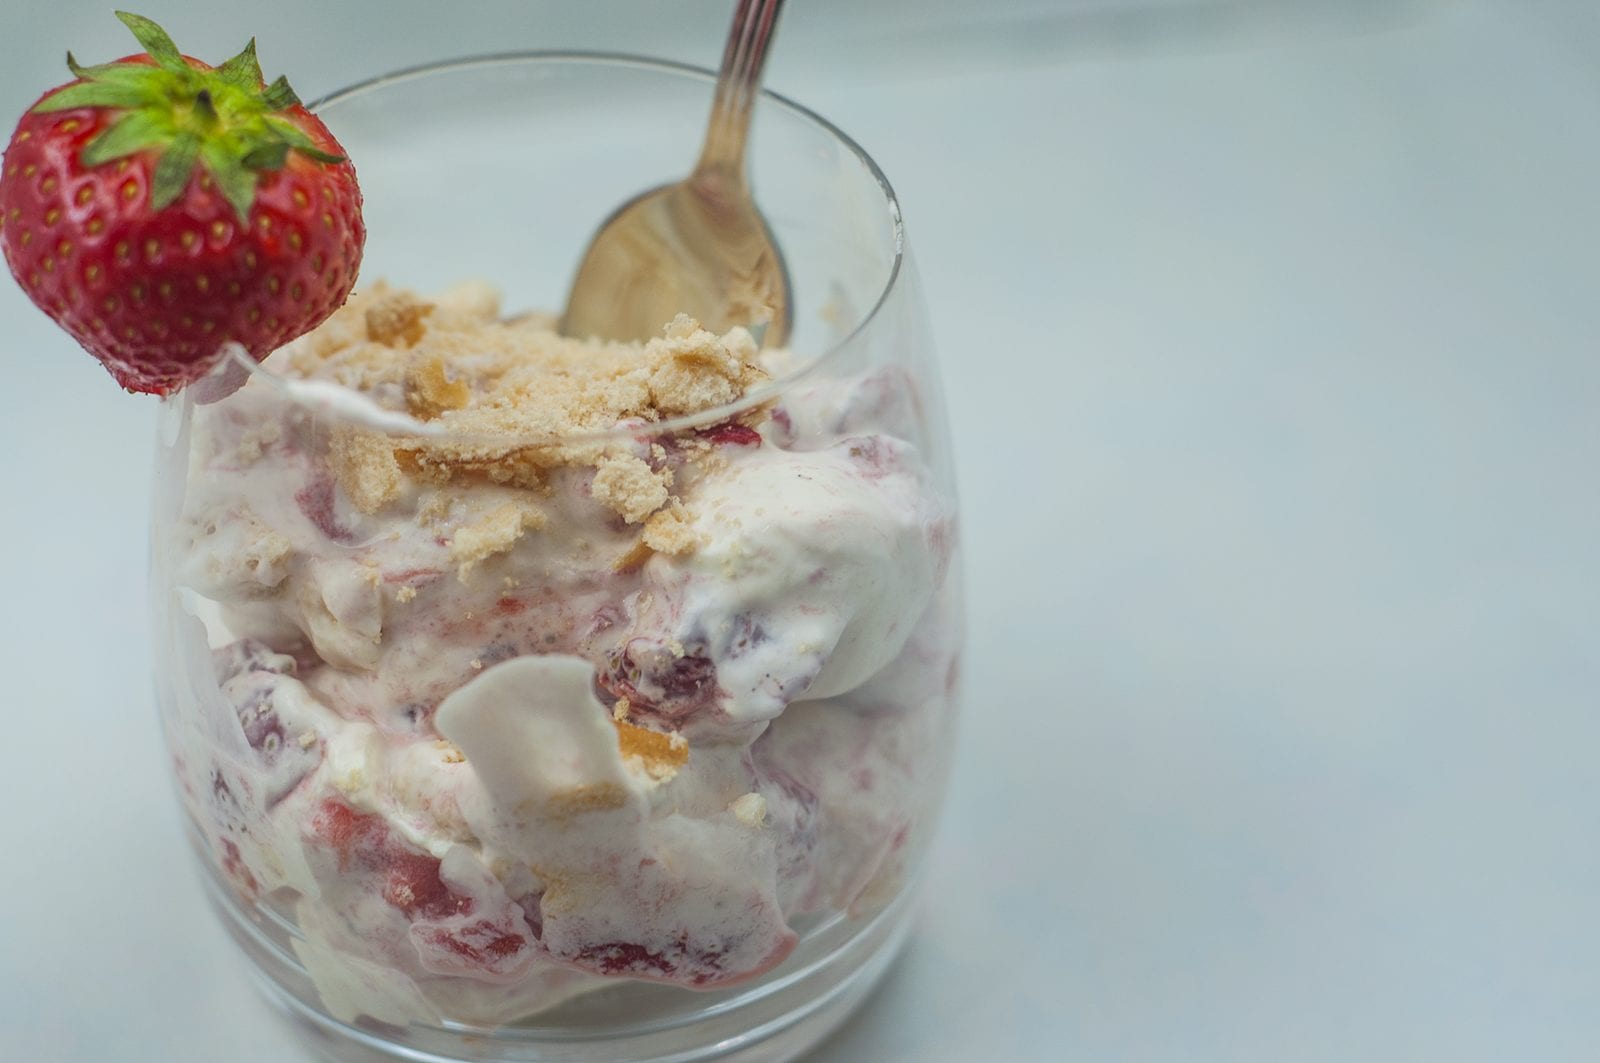 Eton mess is a quintessentially English decadent dessert of strawberries, meringue and whipped cream. Exceedingly nice but also dangerously naughty... Yum! | theyumyumclub.com